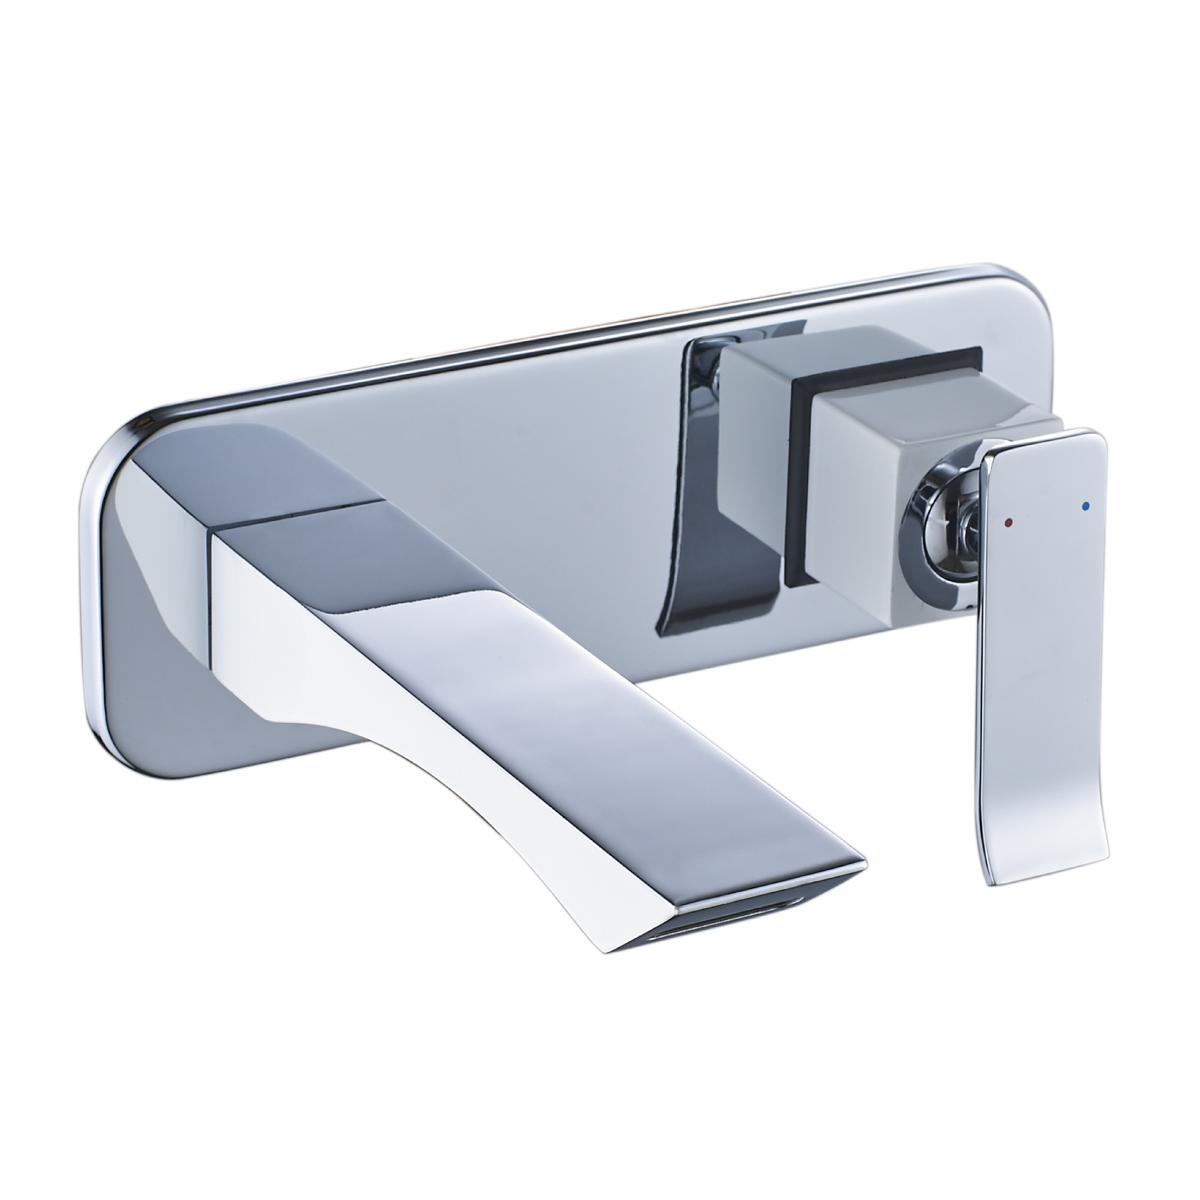 LM5826CW Built-in washbasin faucet